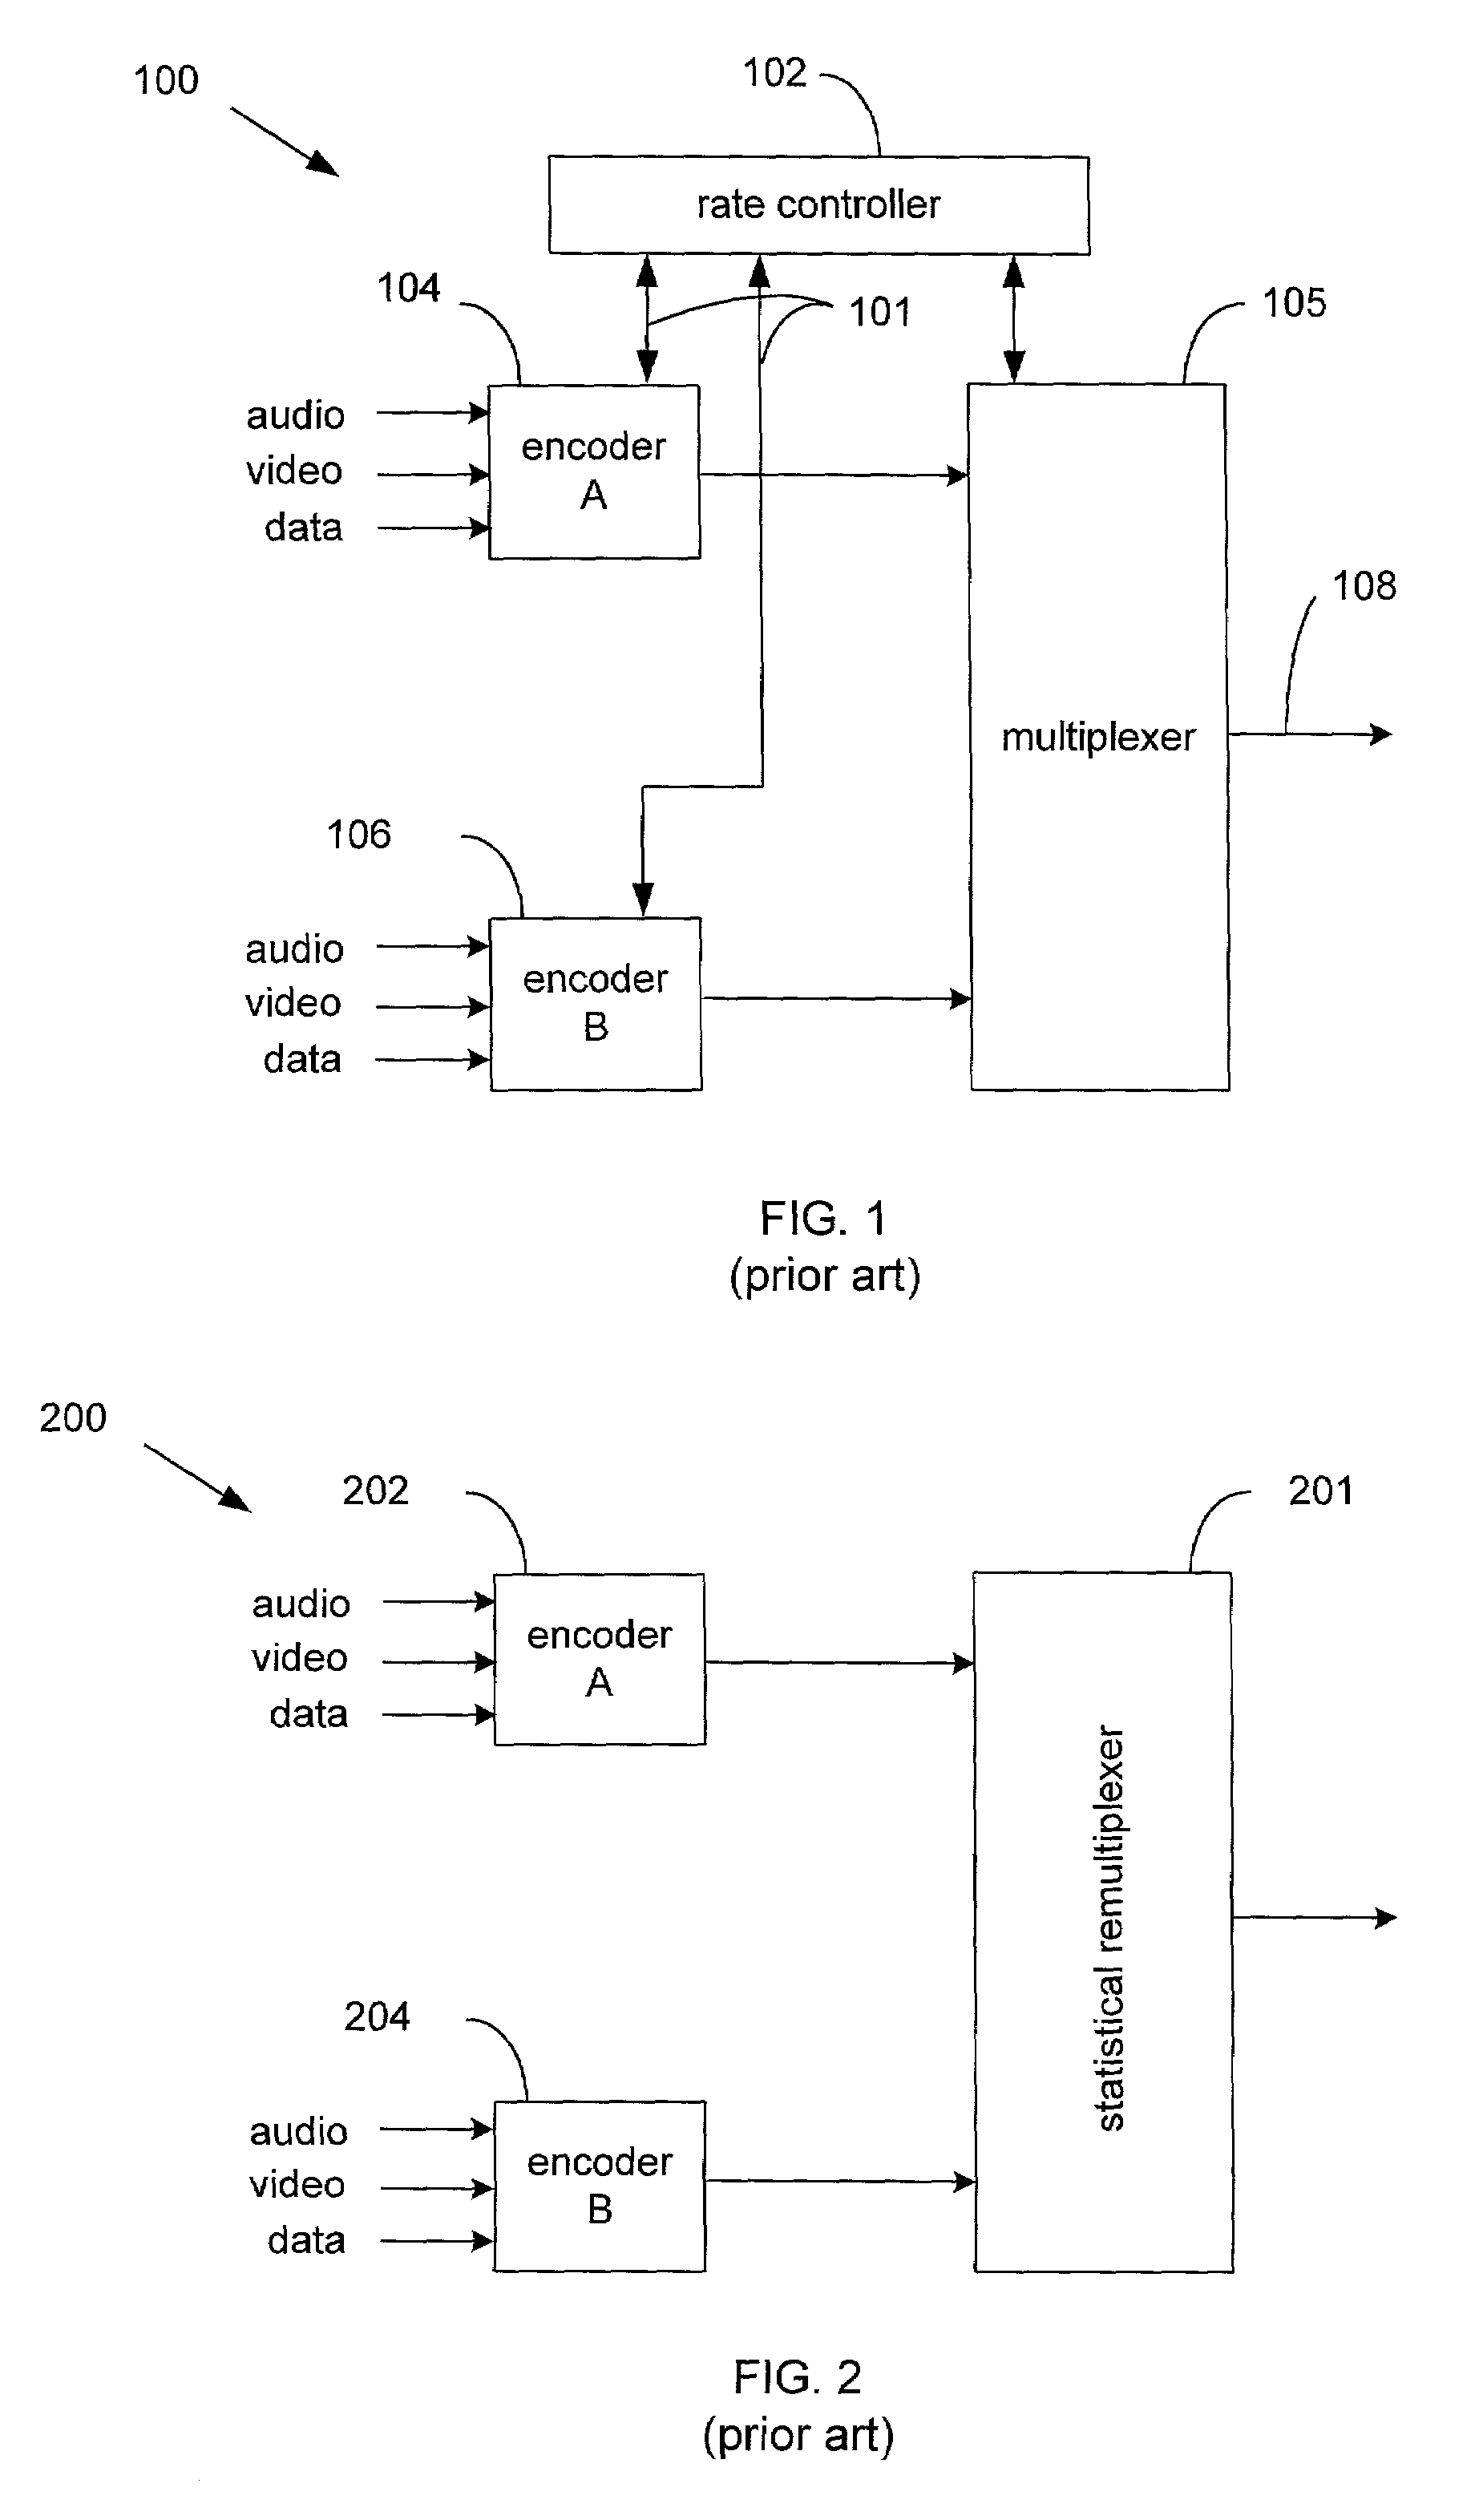 Methods and apparatus to evaluate statistical remultiplexer performance